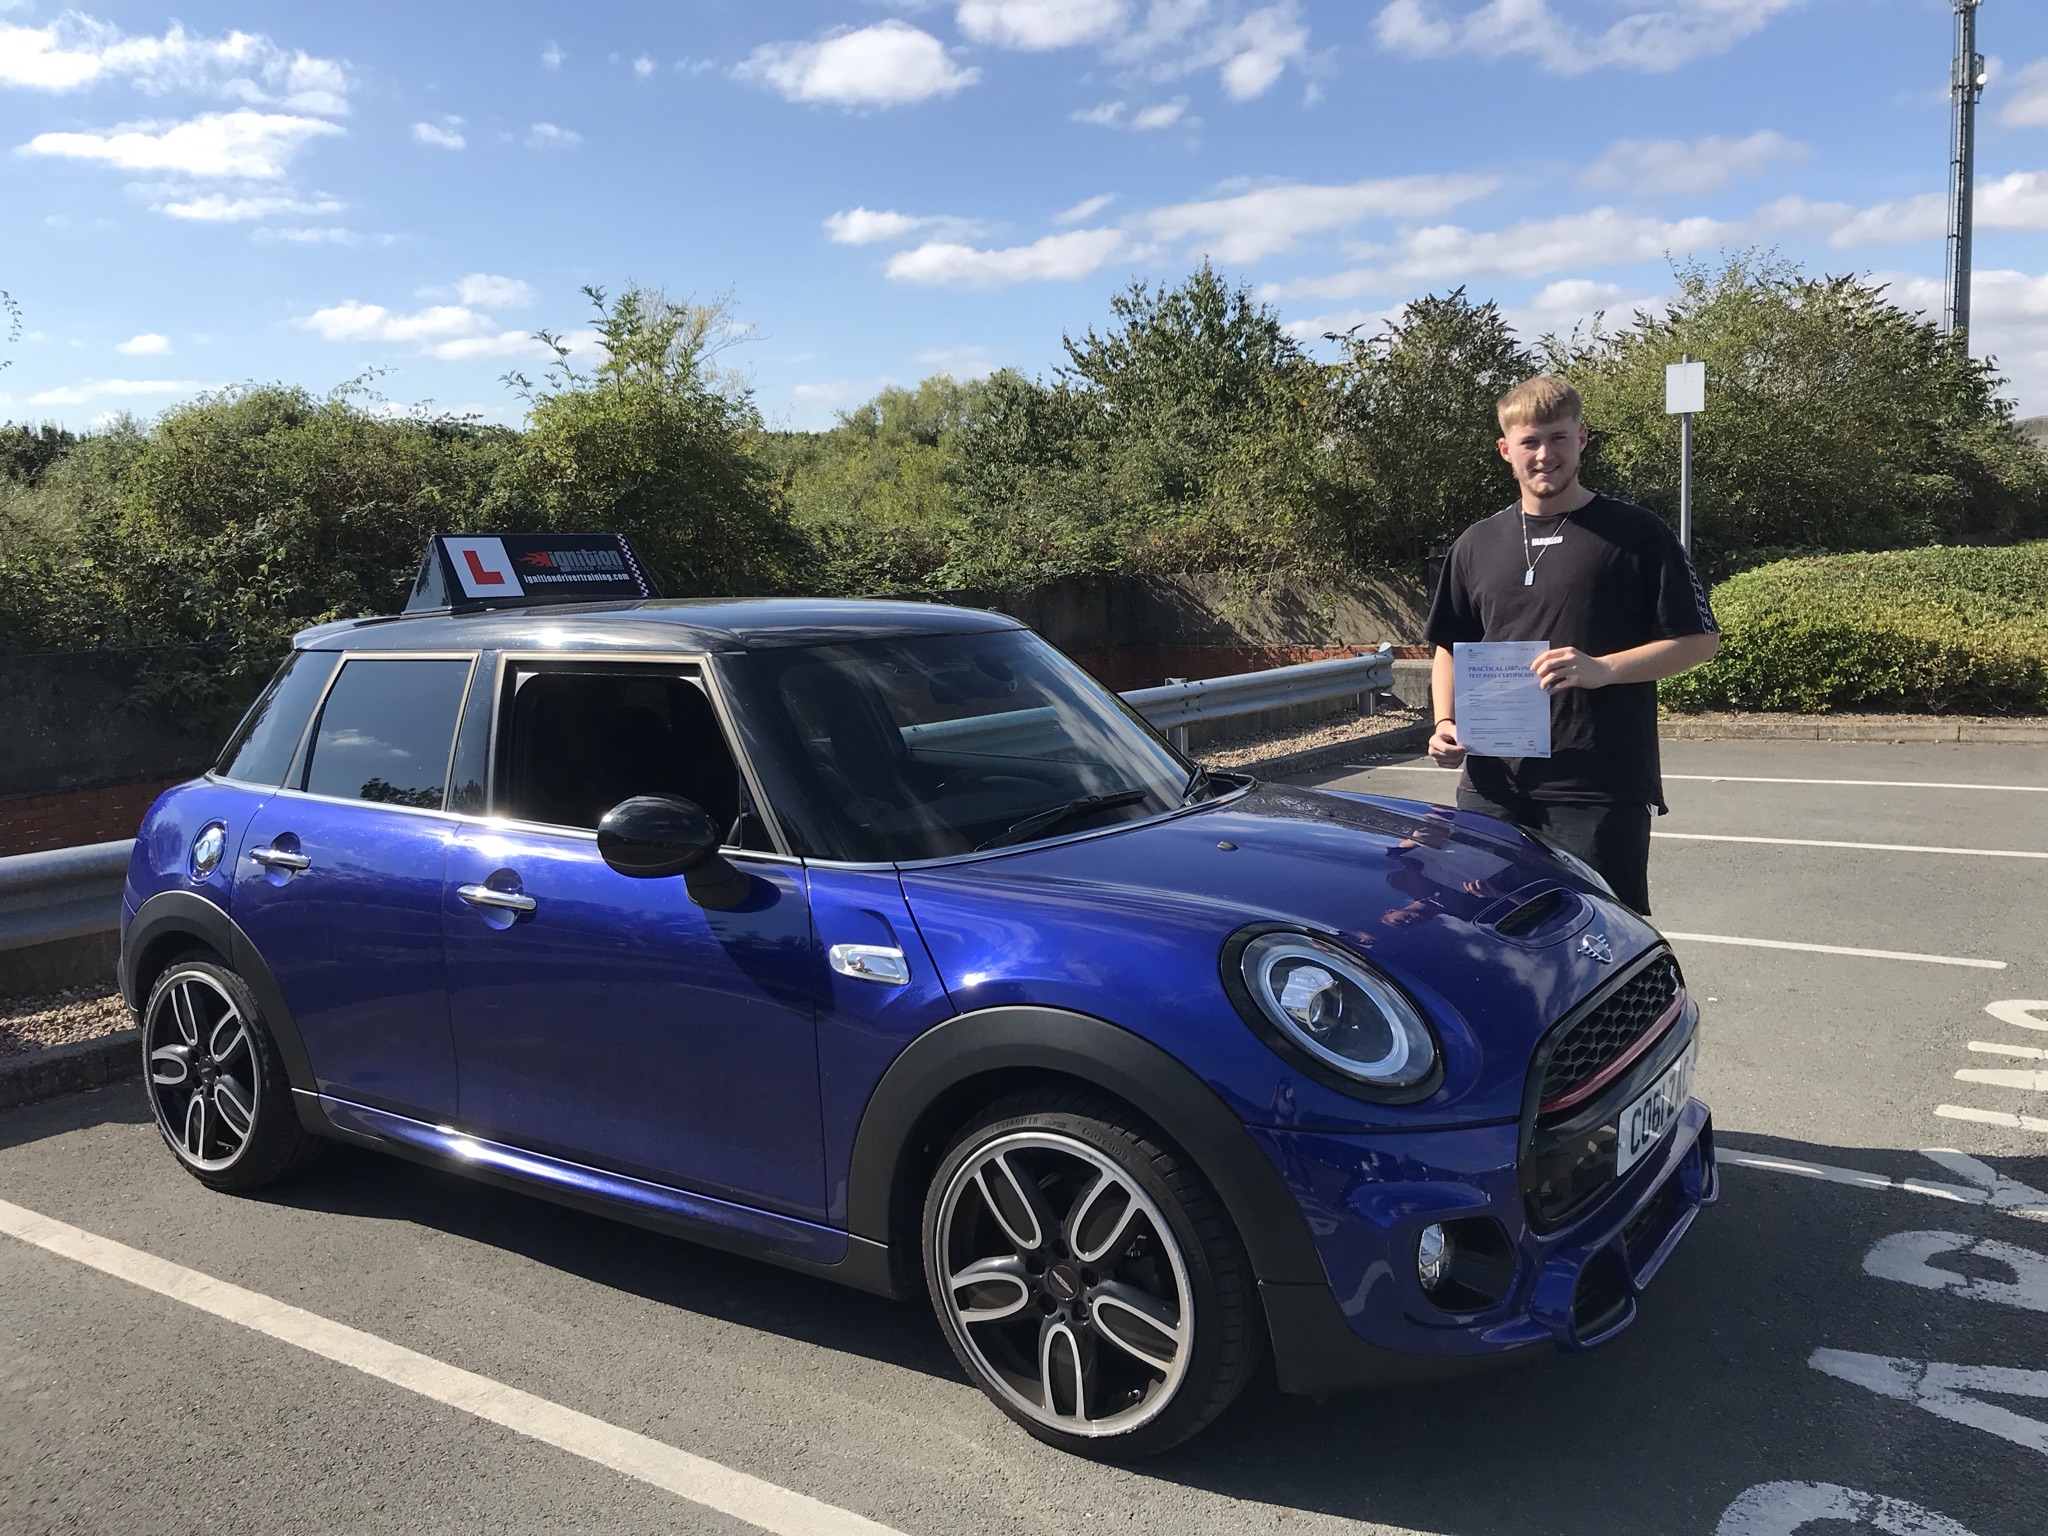 Charlie passed first time!